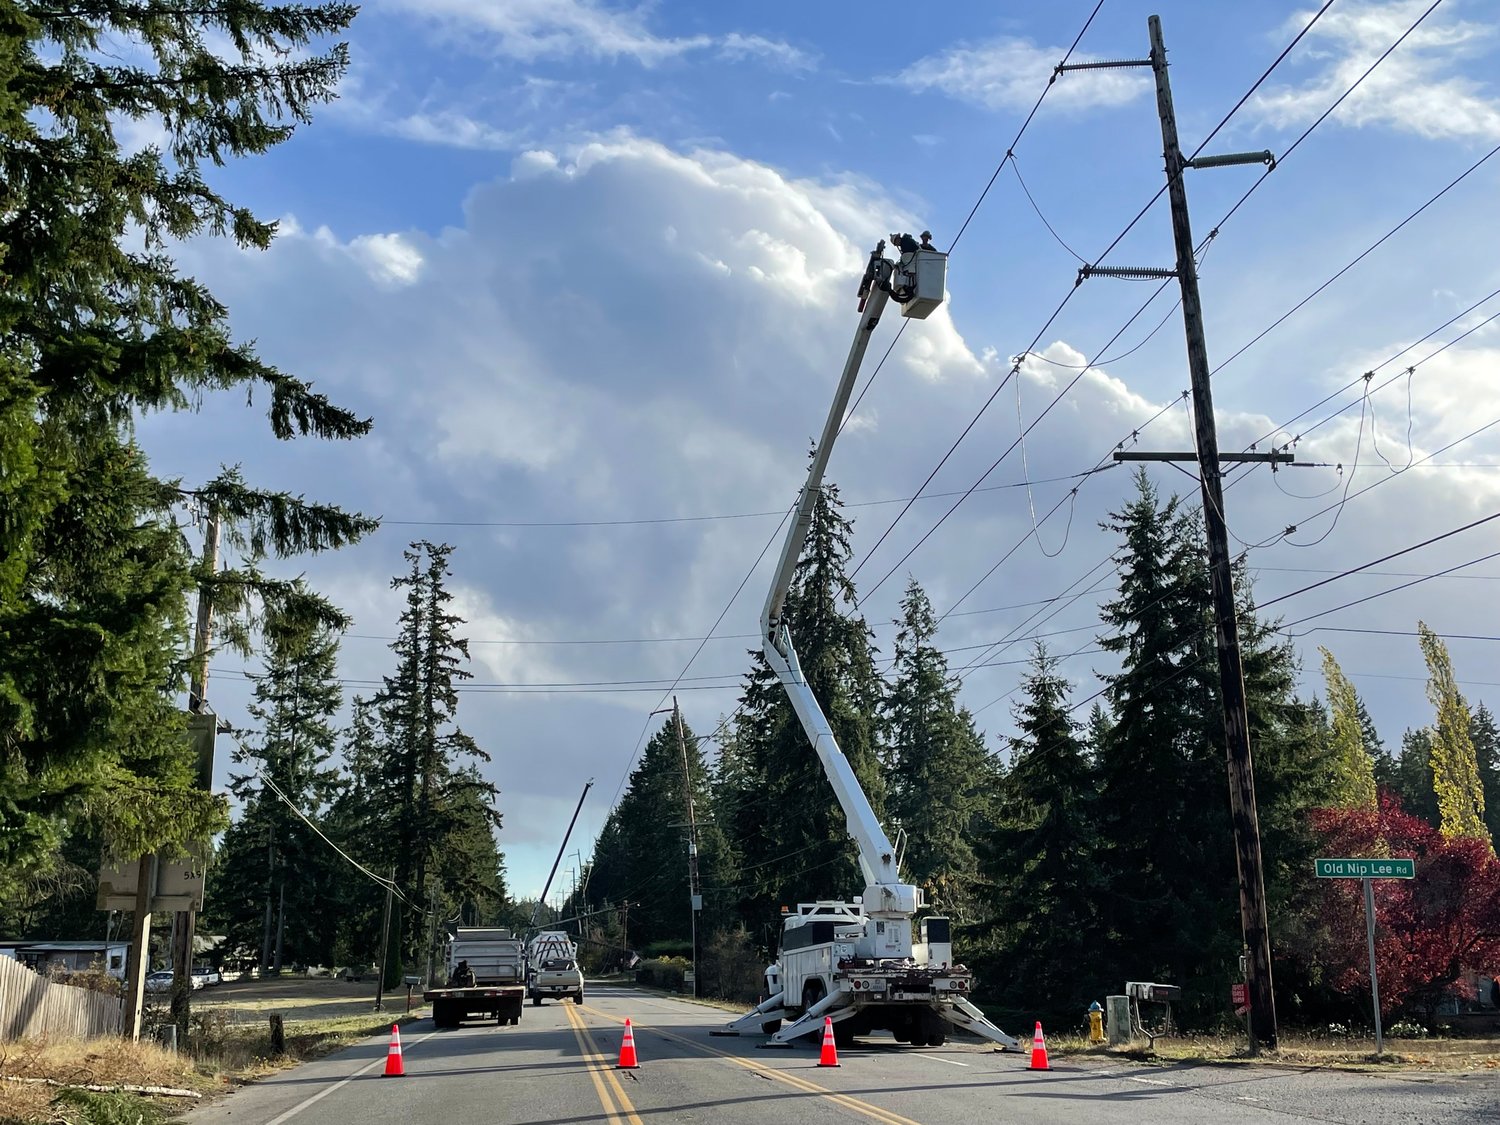 The Jefferson County Public Utility District line crew, along with crews from the Mason Public Utility District 1, Olympic Electric Company, and other groups worked throughout the weekend to restore electricity to customers.